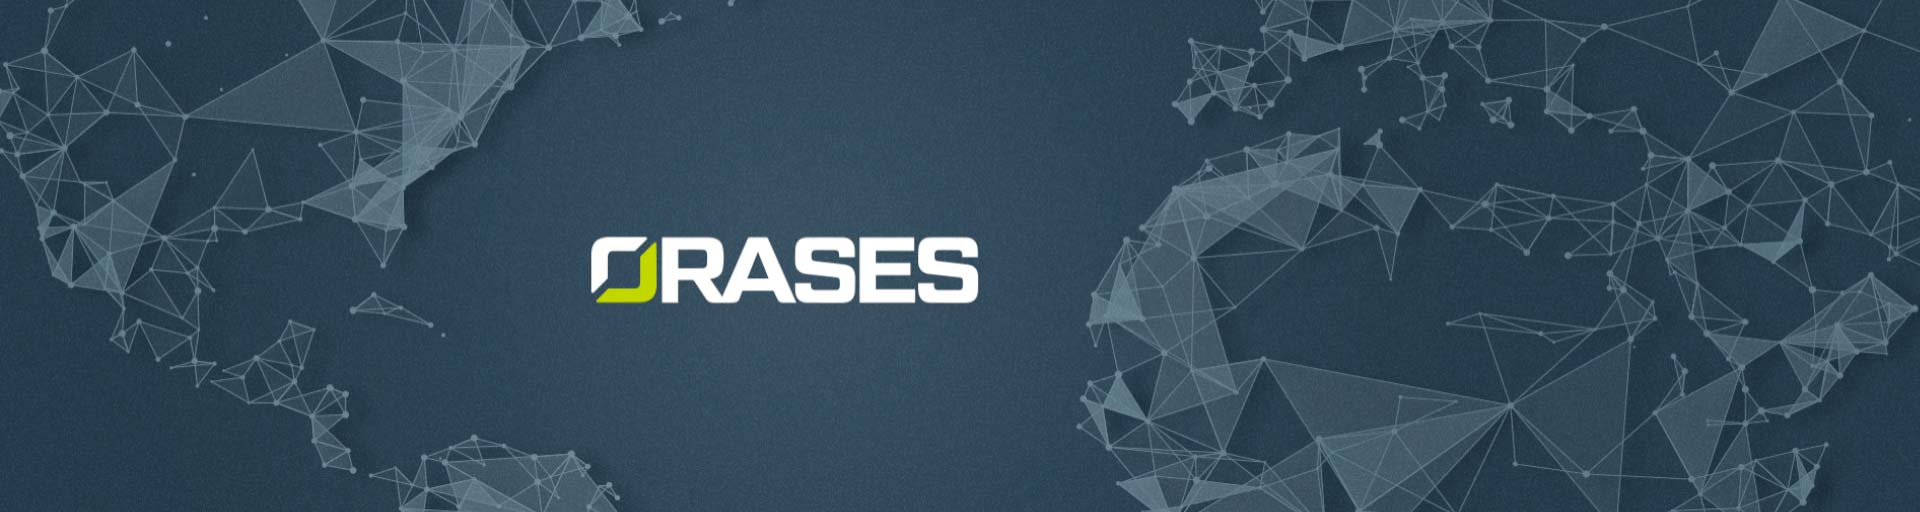 Orases logo with navy map